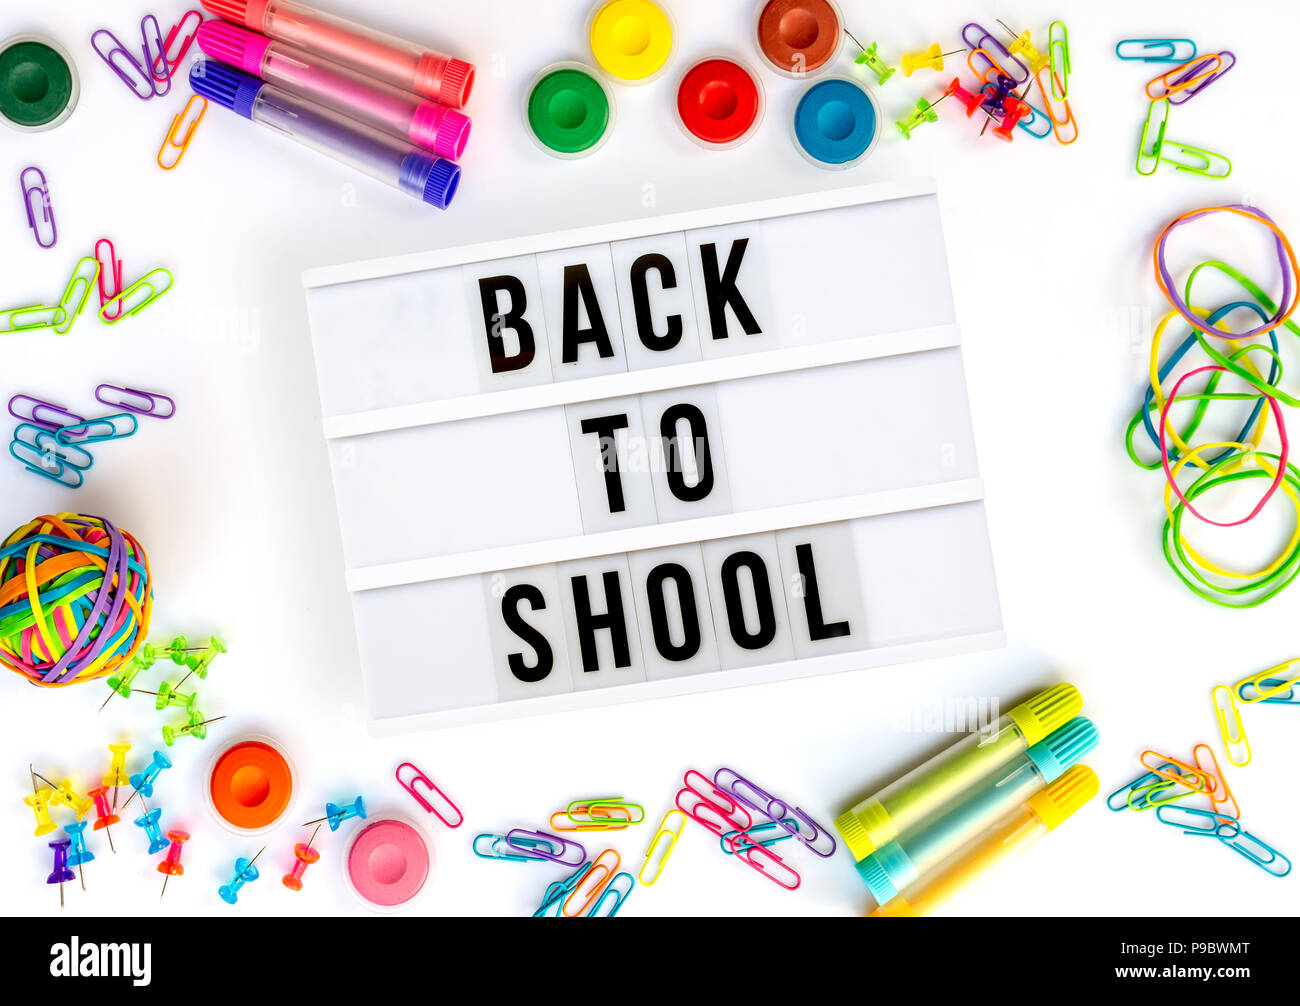 Back to school written in a light box, colorful school supplies isolated on white Stock Photo